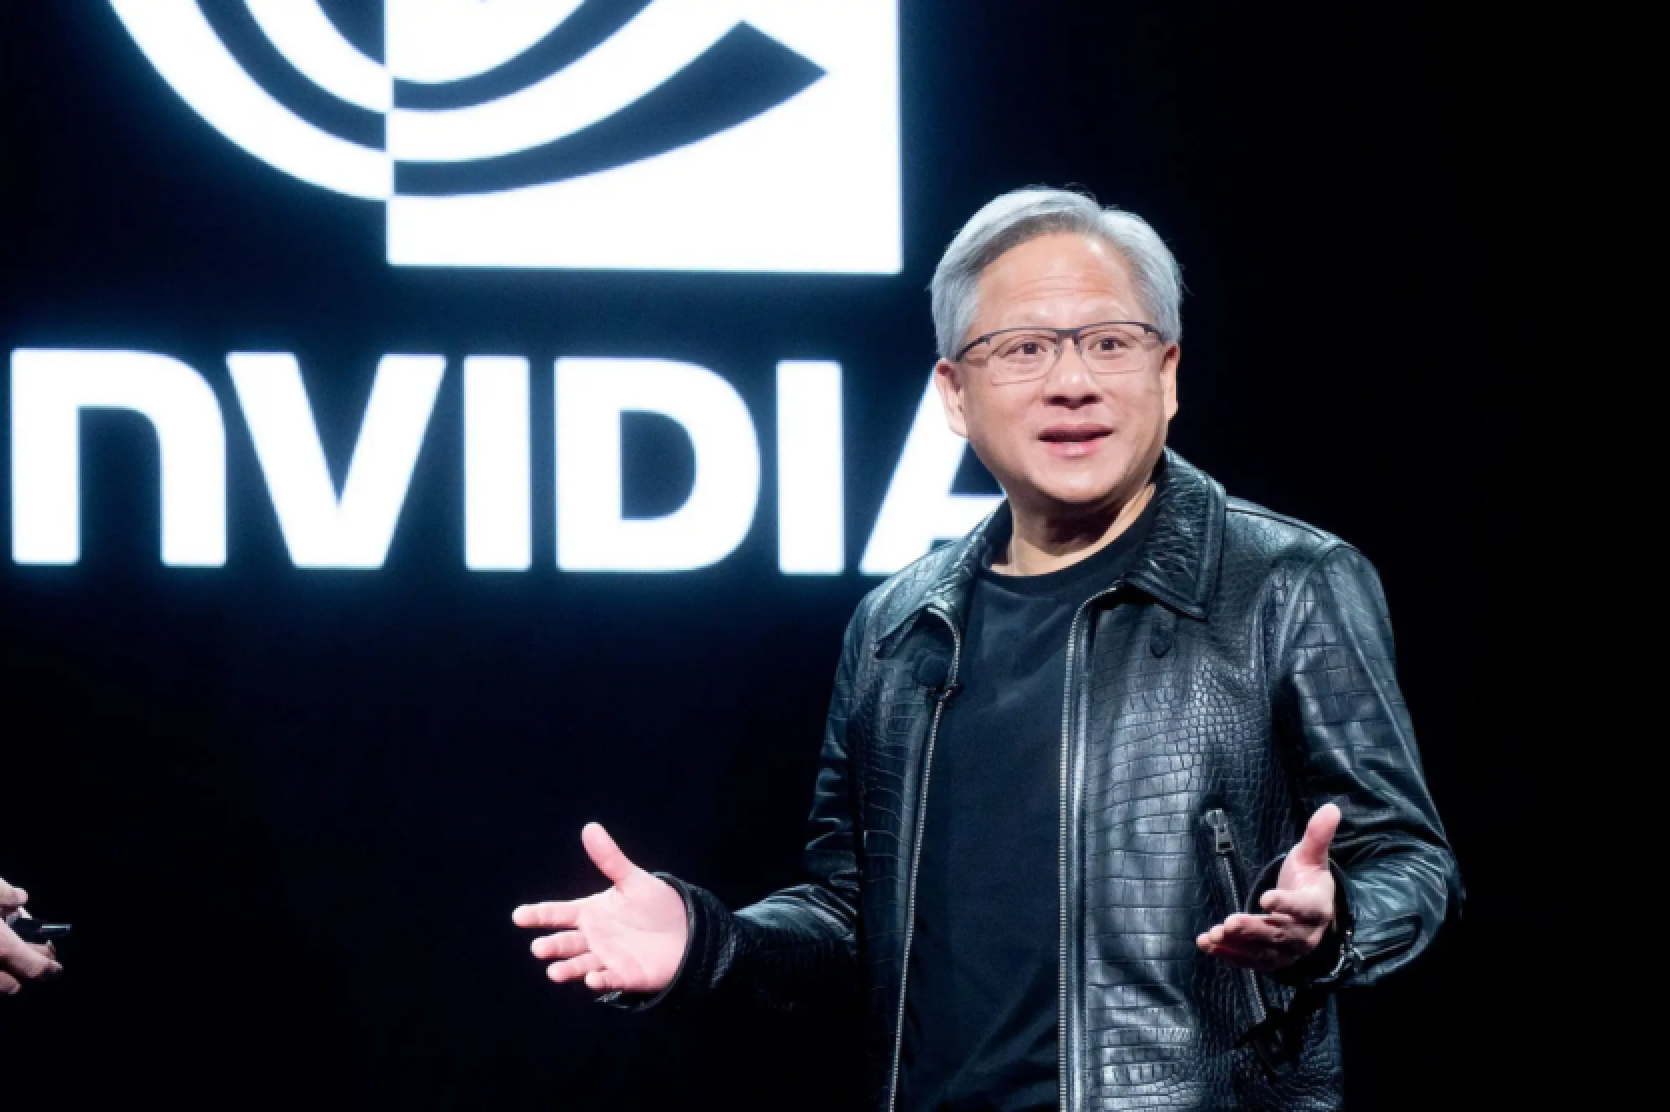 Demand for Nvidia chips is so high that Jensen Huang had to assure analysts that the company is distributing them "fairly"